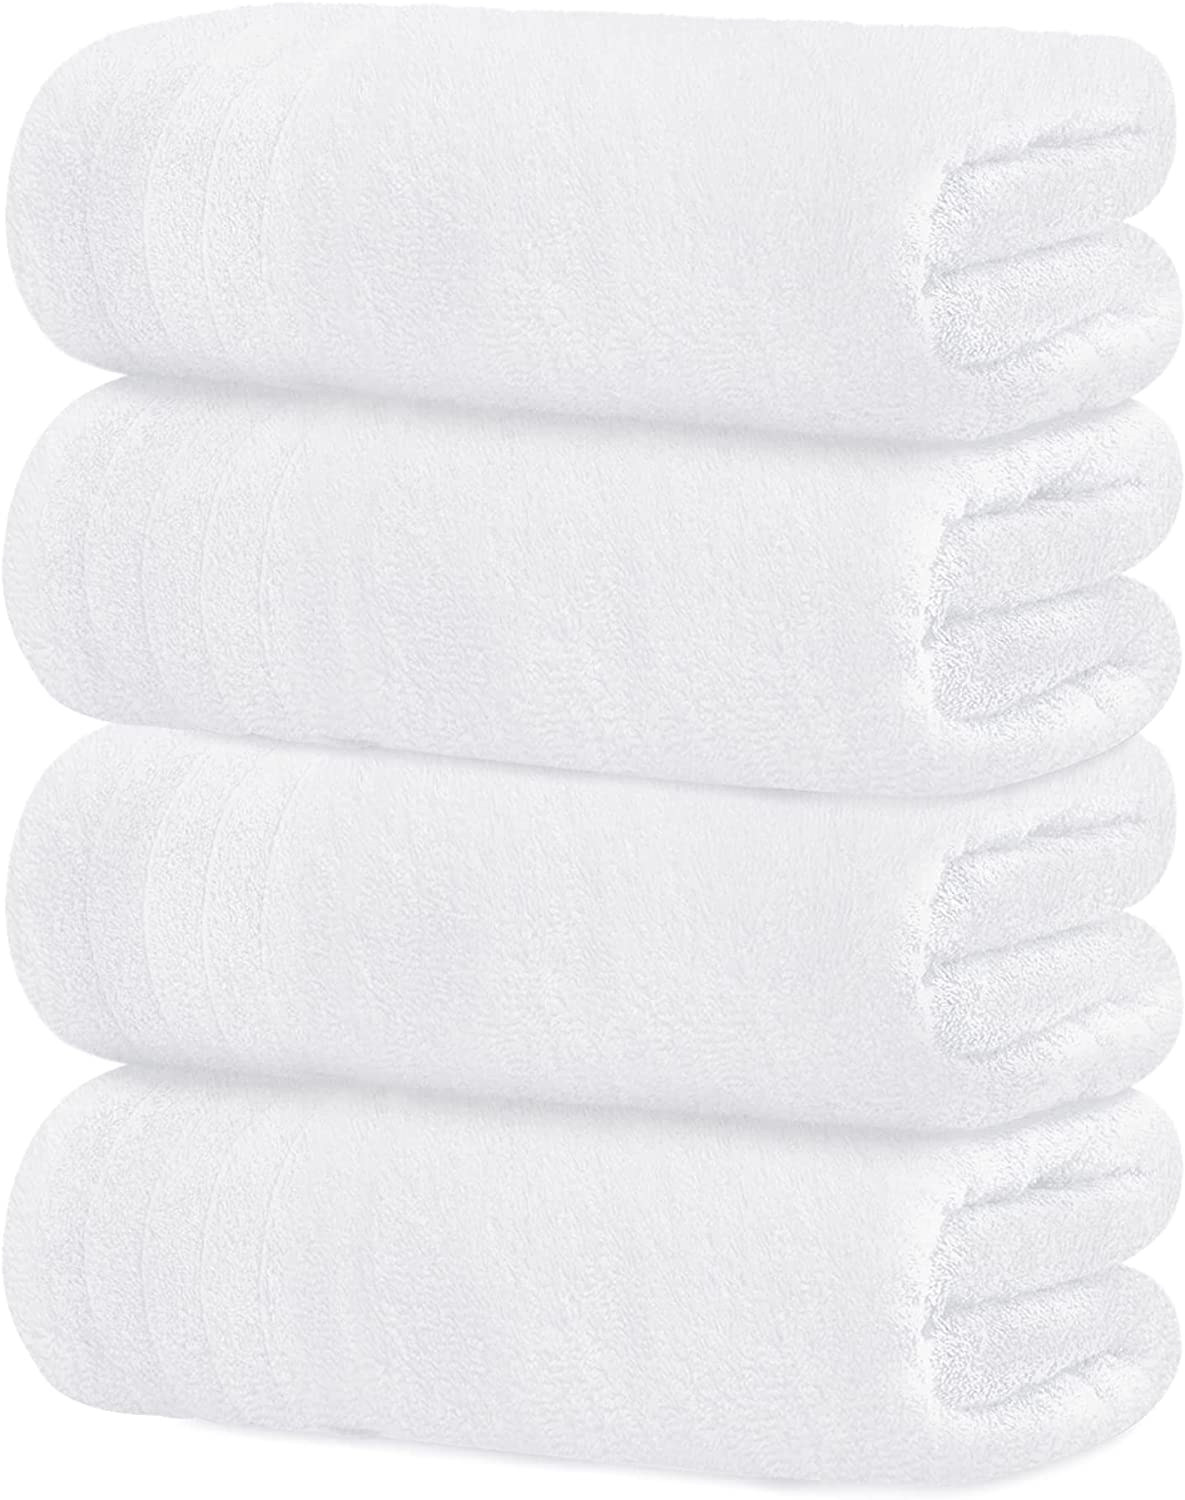 Tens Towels Large Bath Towels, 100% Cotton Towels, 30 x 60 Inches, Extra  Large B